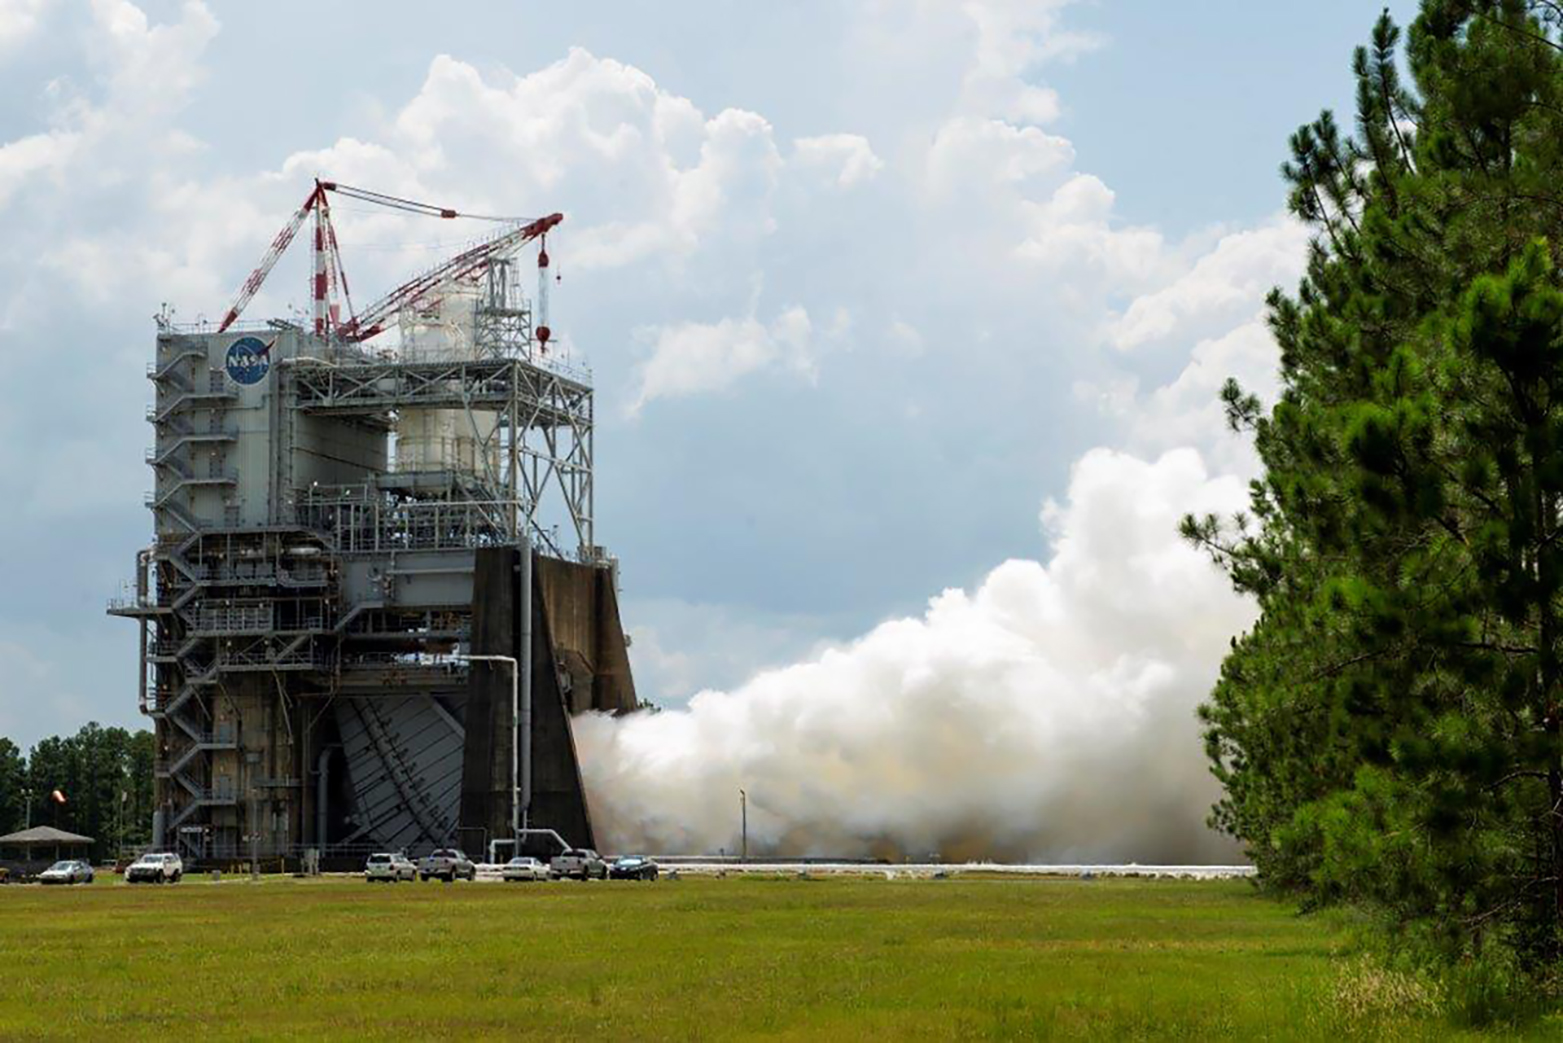 RS-25 test on July 17, 2015